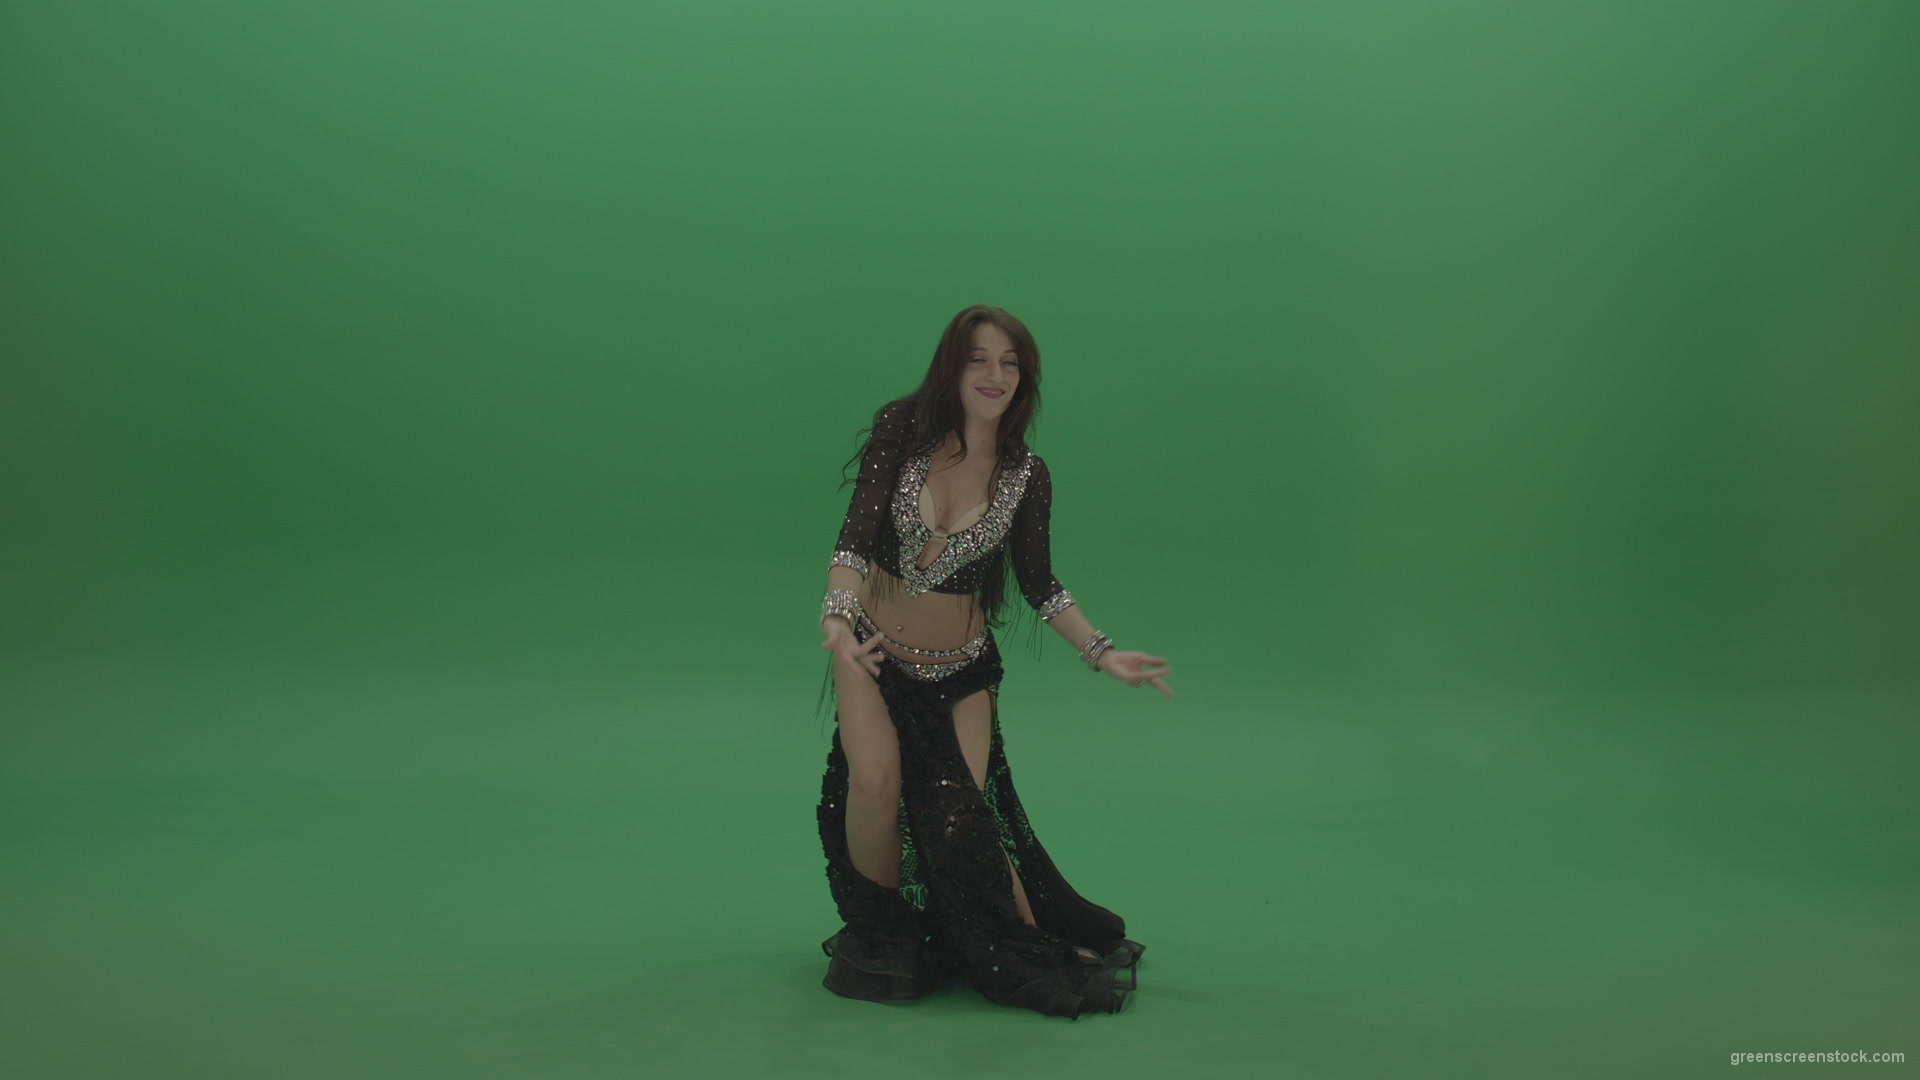 Admirable-belly-dancer-in-black-wear-display-amazing-dance-moves-over-chromakey-background_008 Green Screen Stock